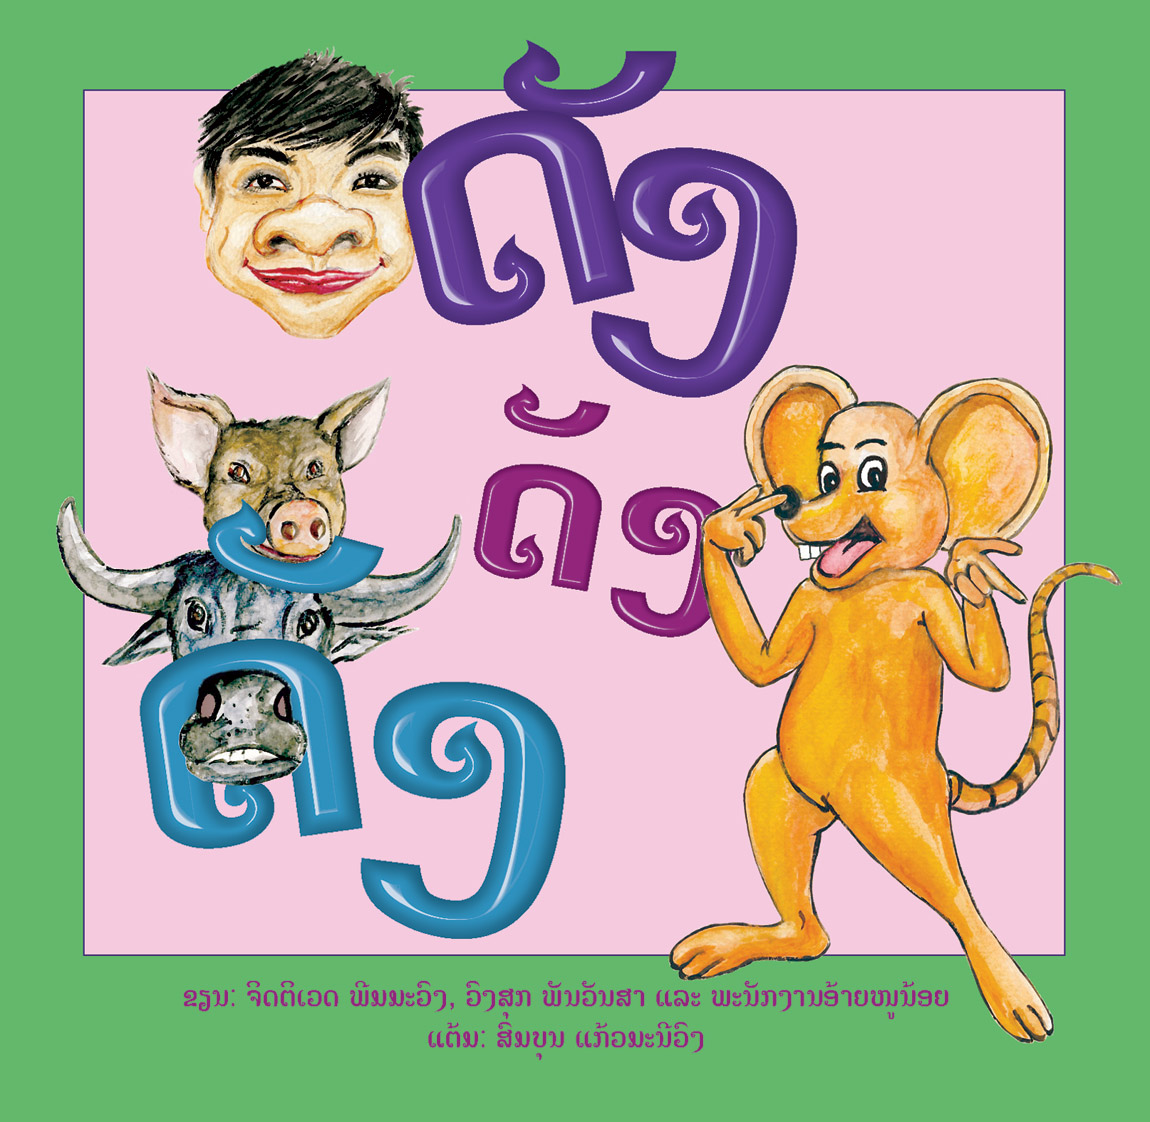 The Nose Book large book cover, published in Lao language